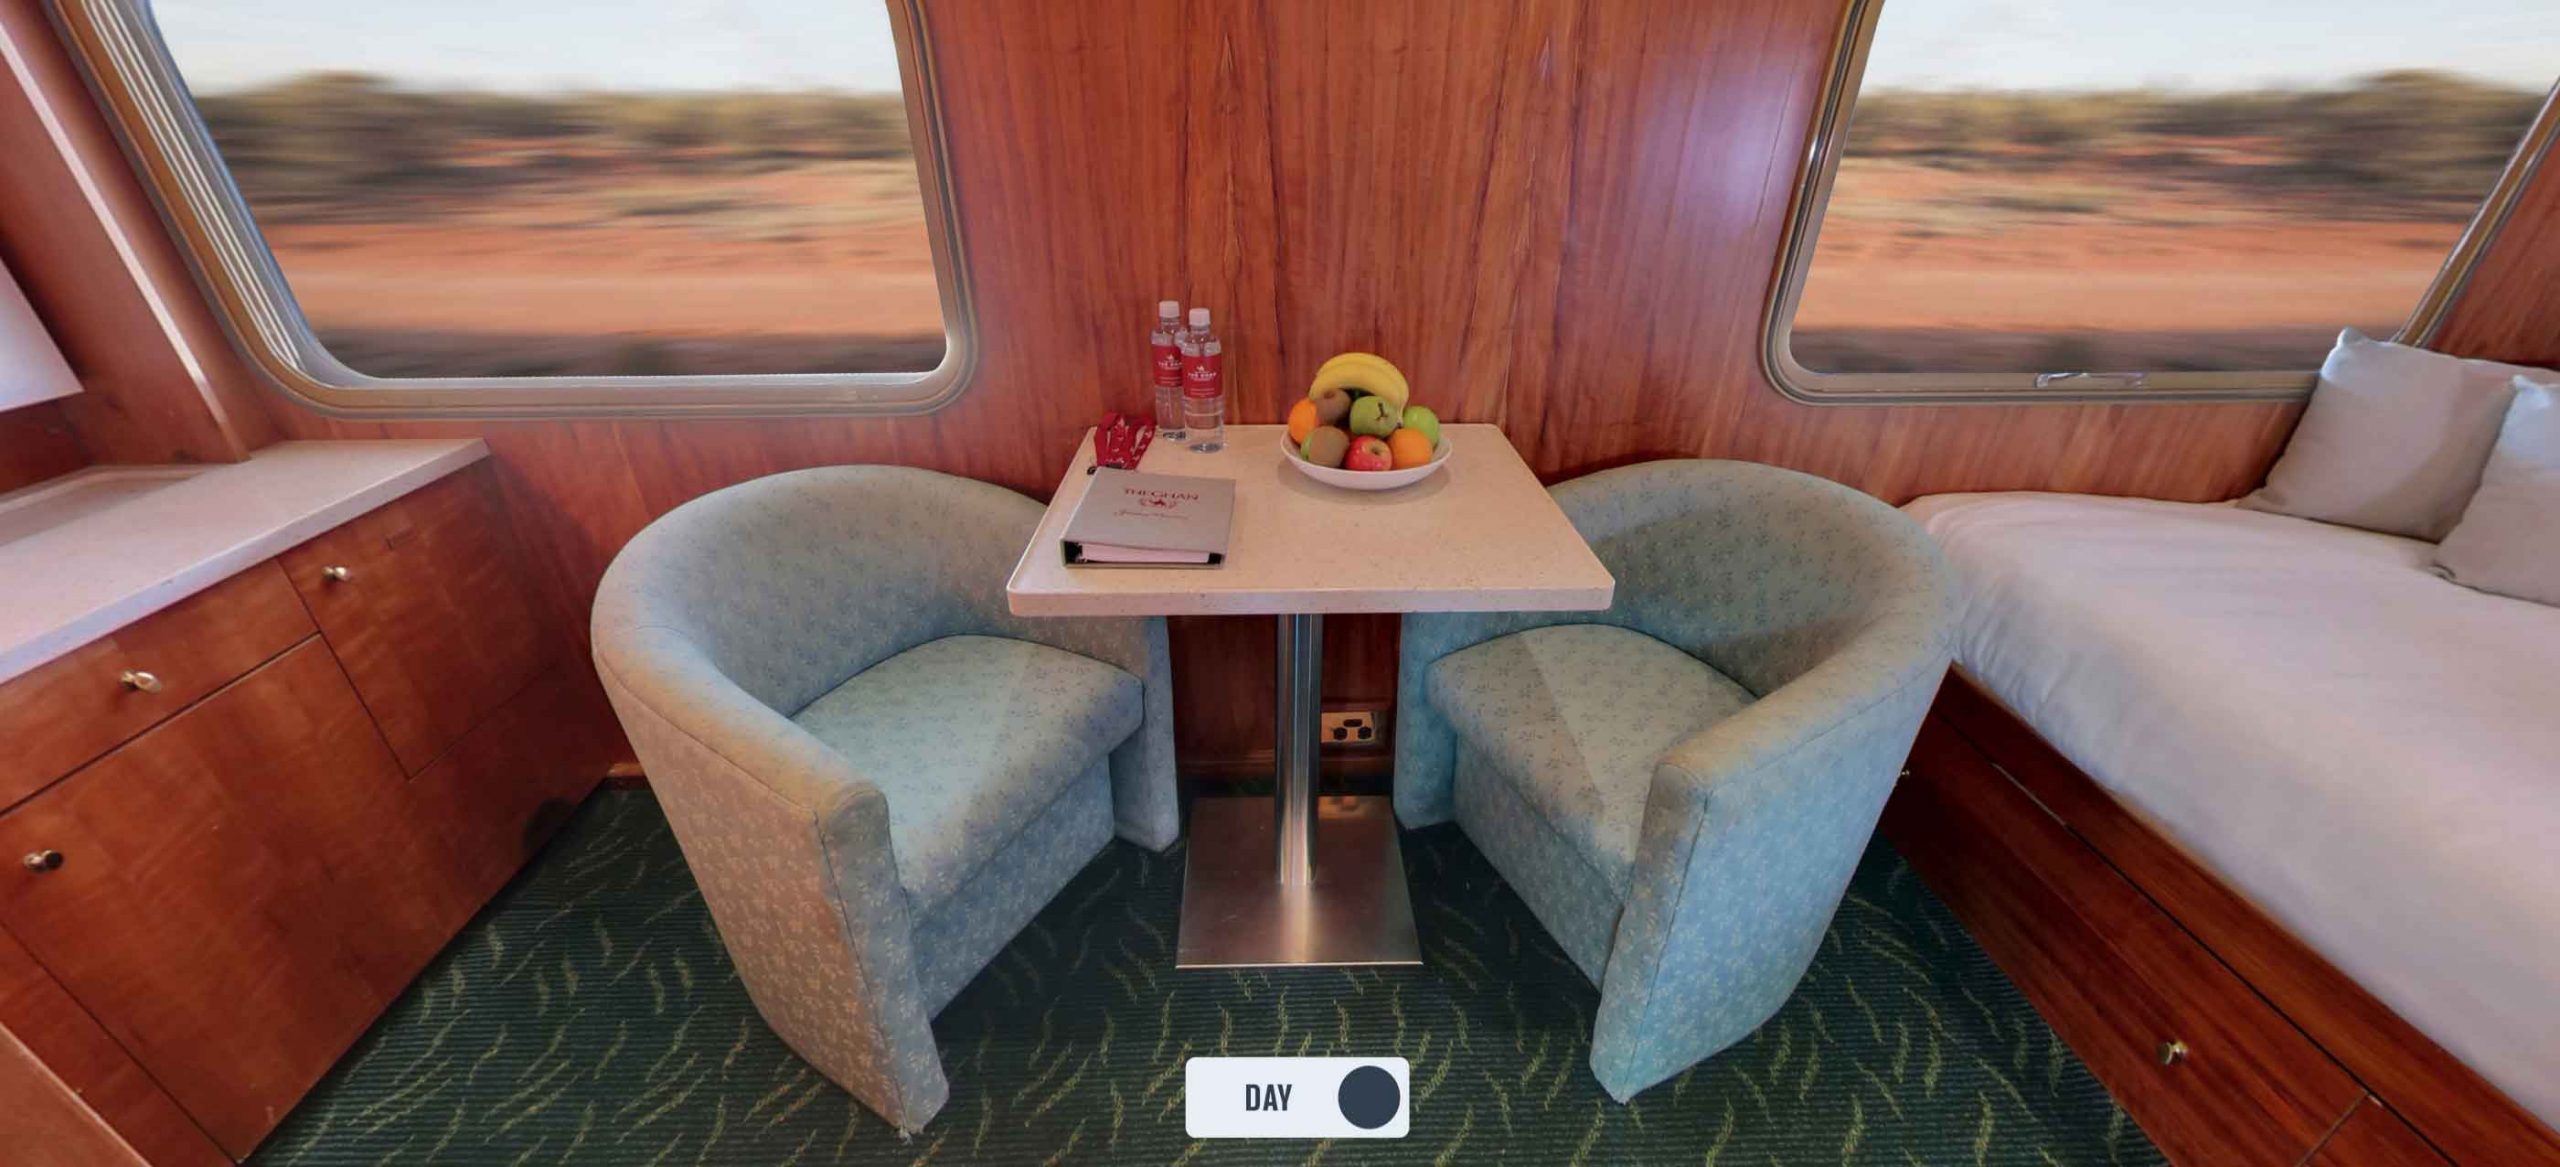 GHAN gold superior cabin seats and table